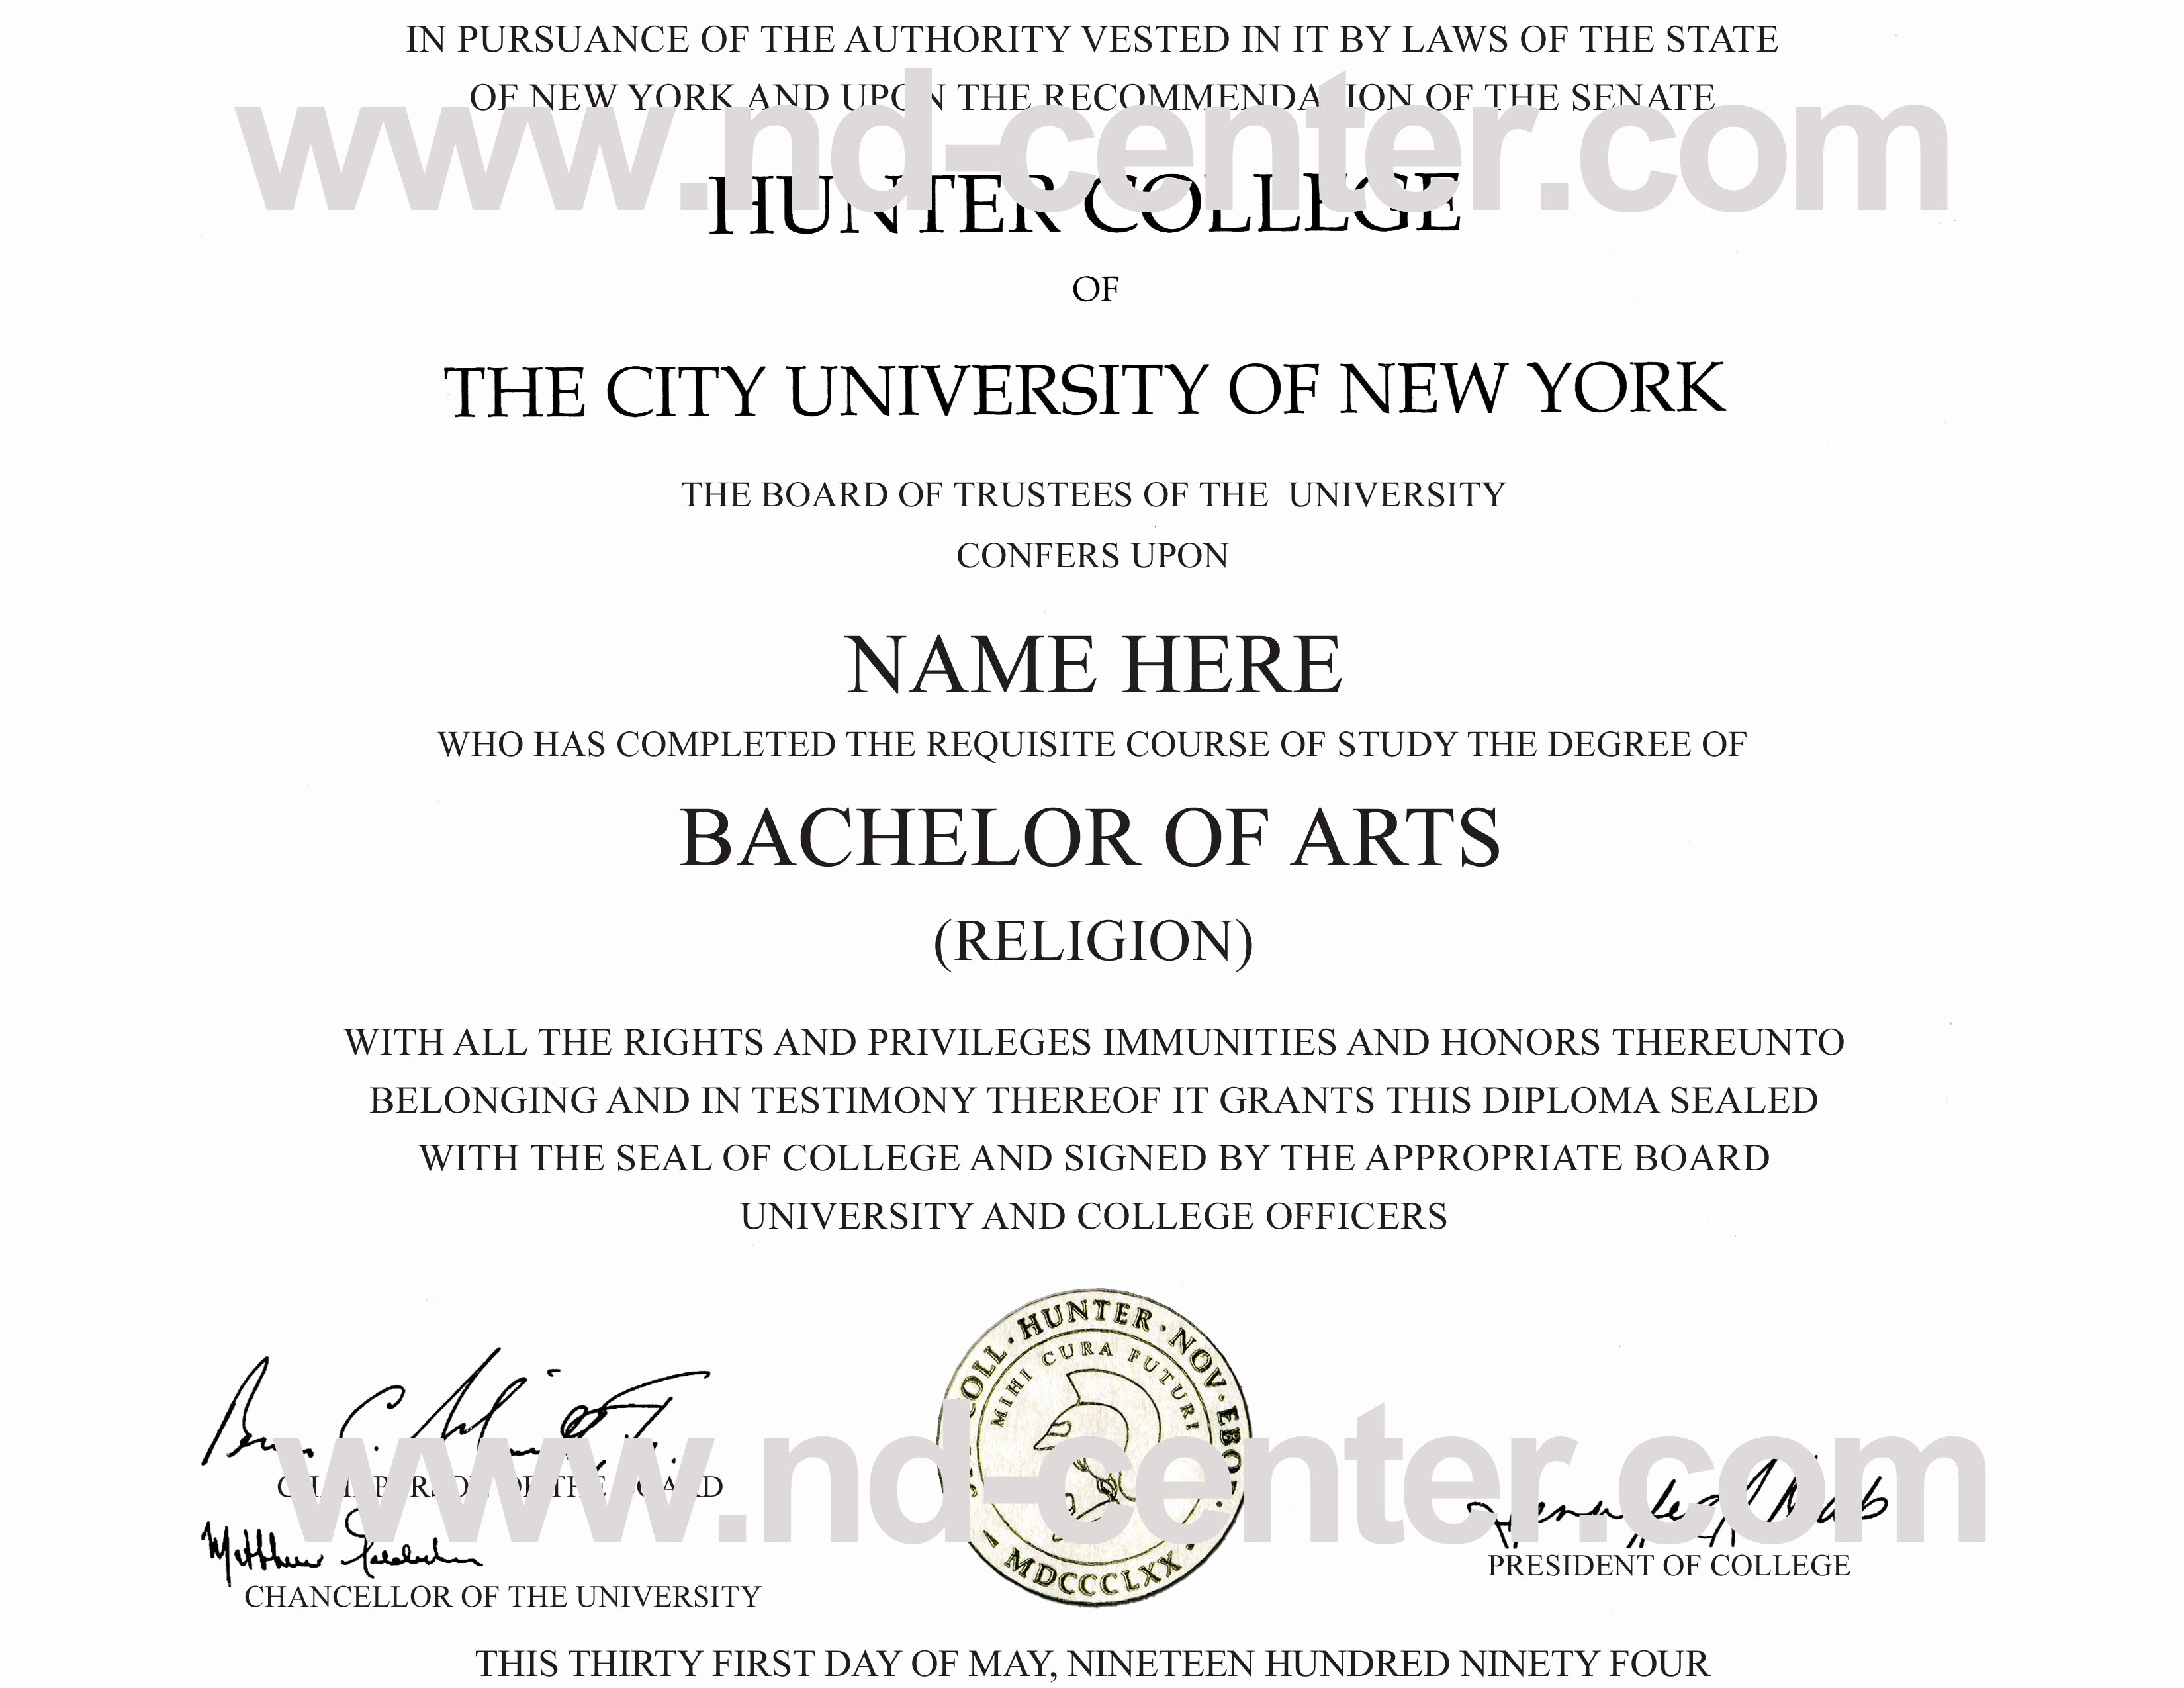 College Degree Certificate Templates Unique Samples Of Fake High School Diplomas and Fake Diplomas